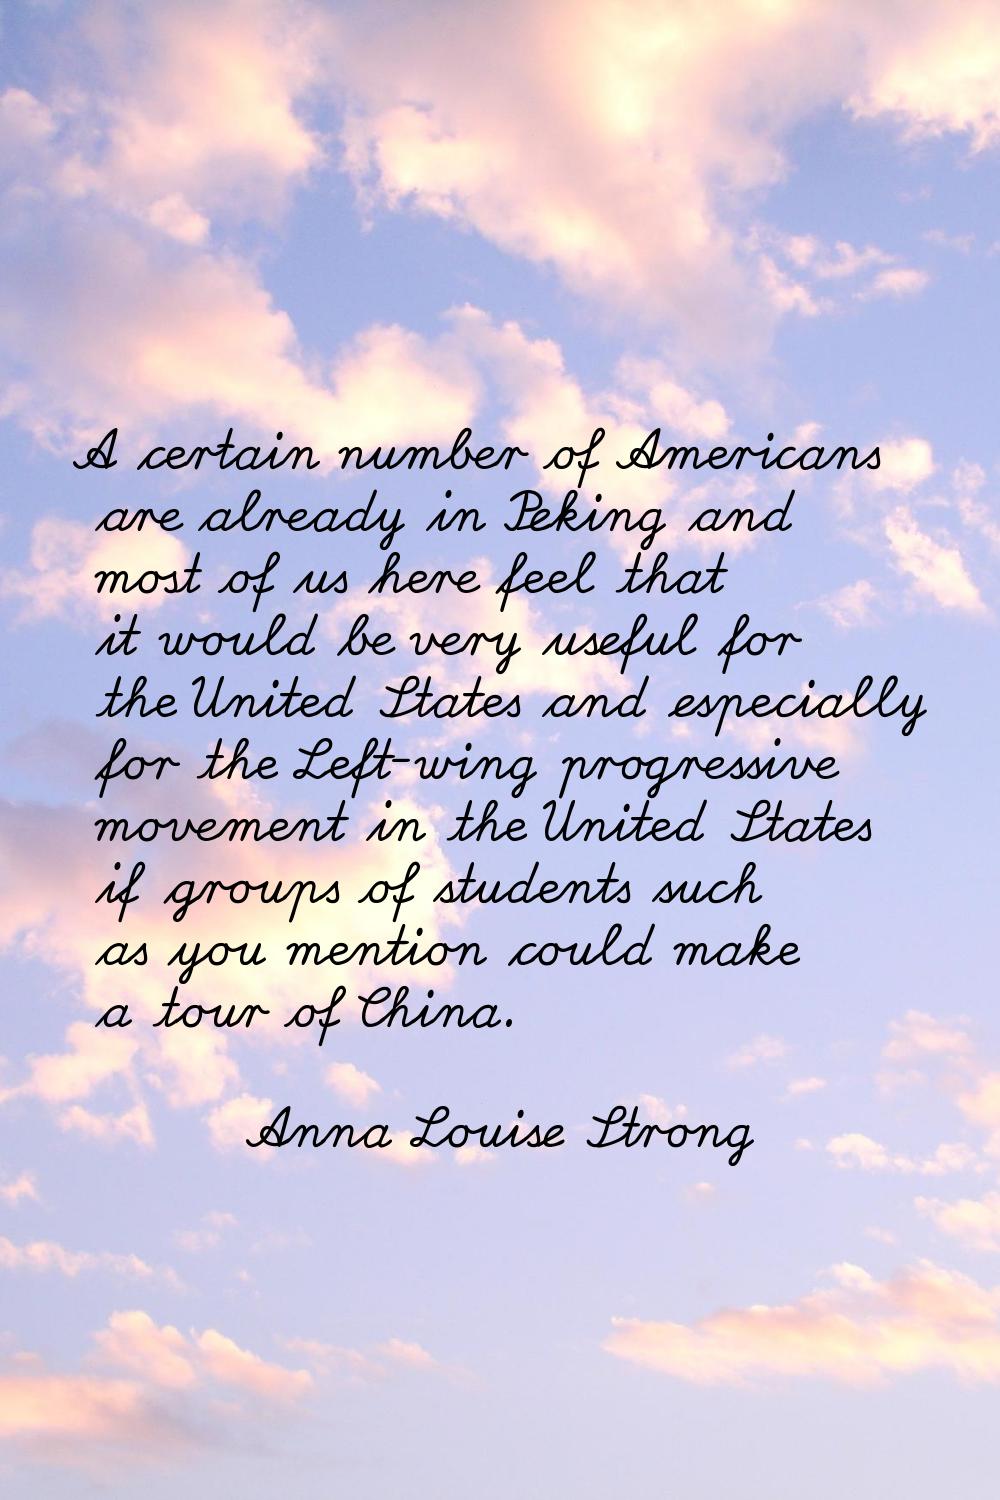 A certain number of Americans are already in Peking and most of us here feel that it would be very 